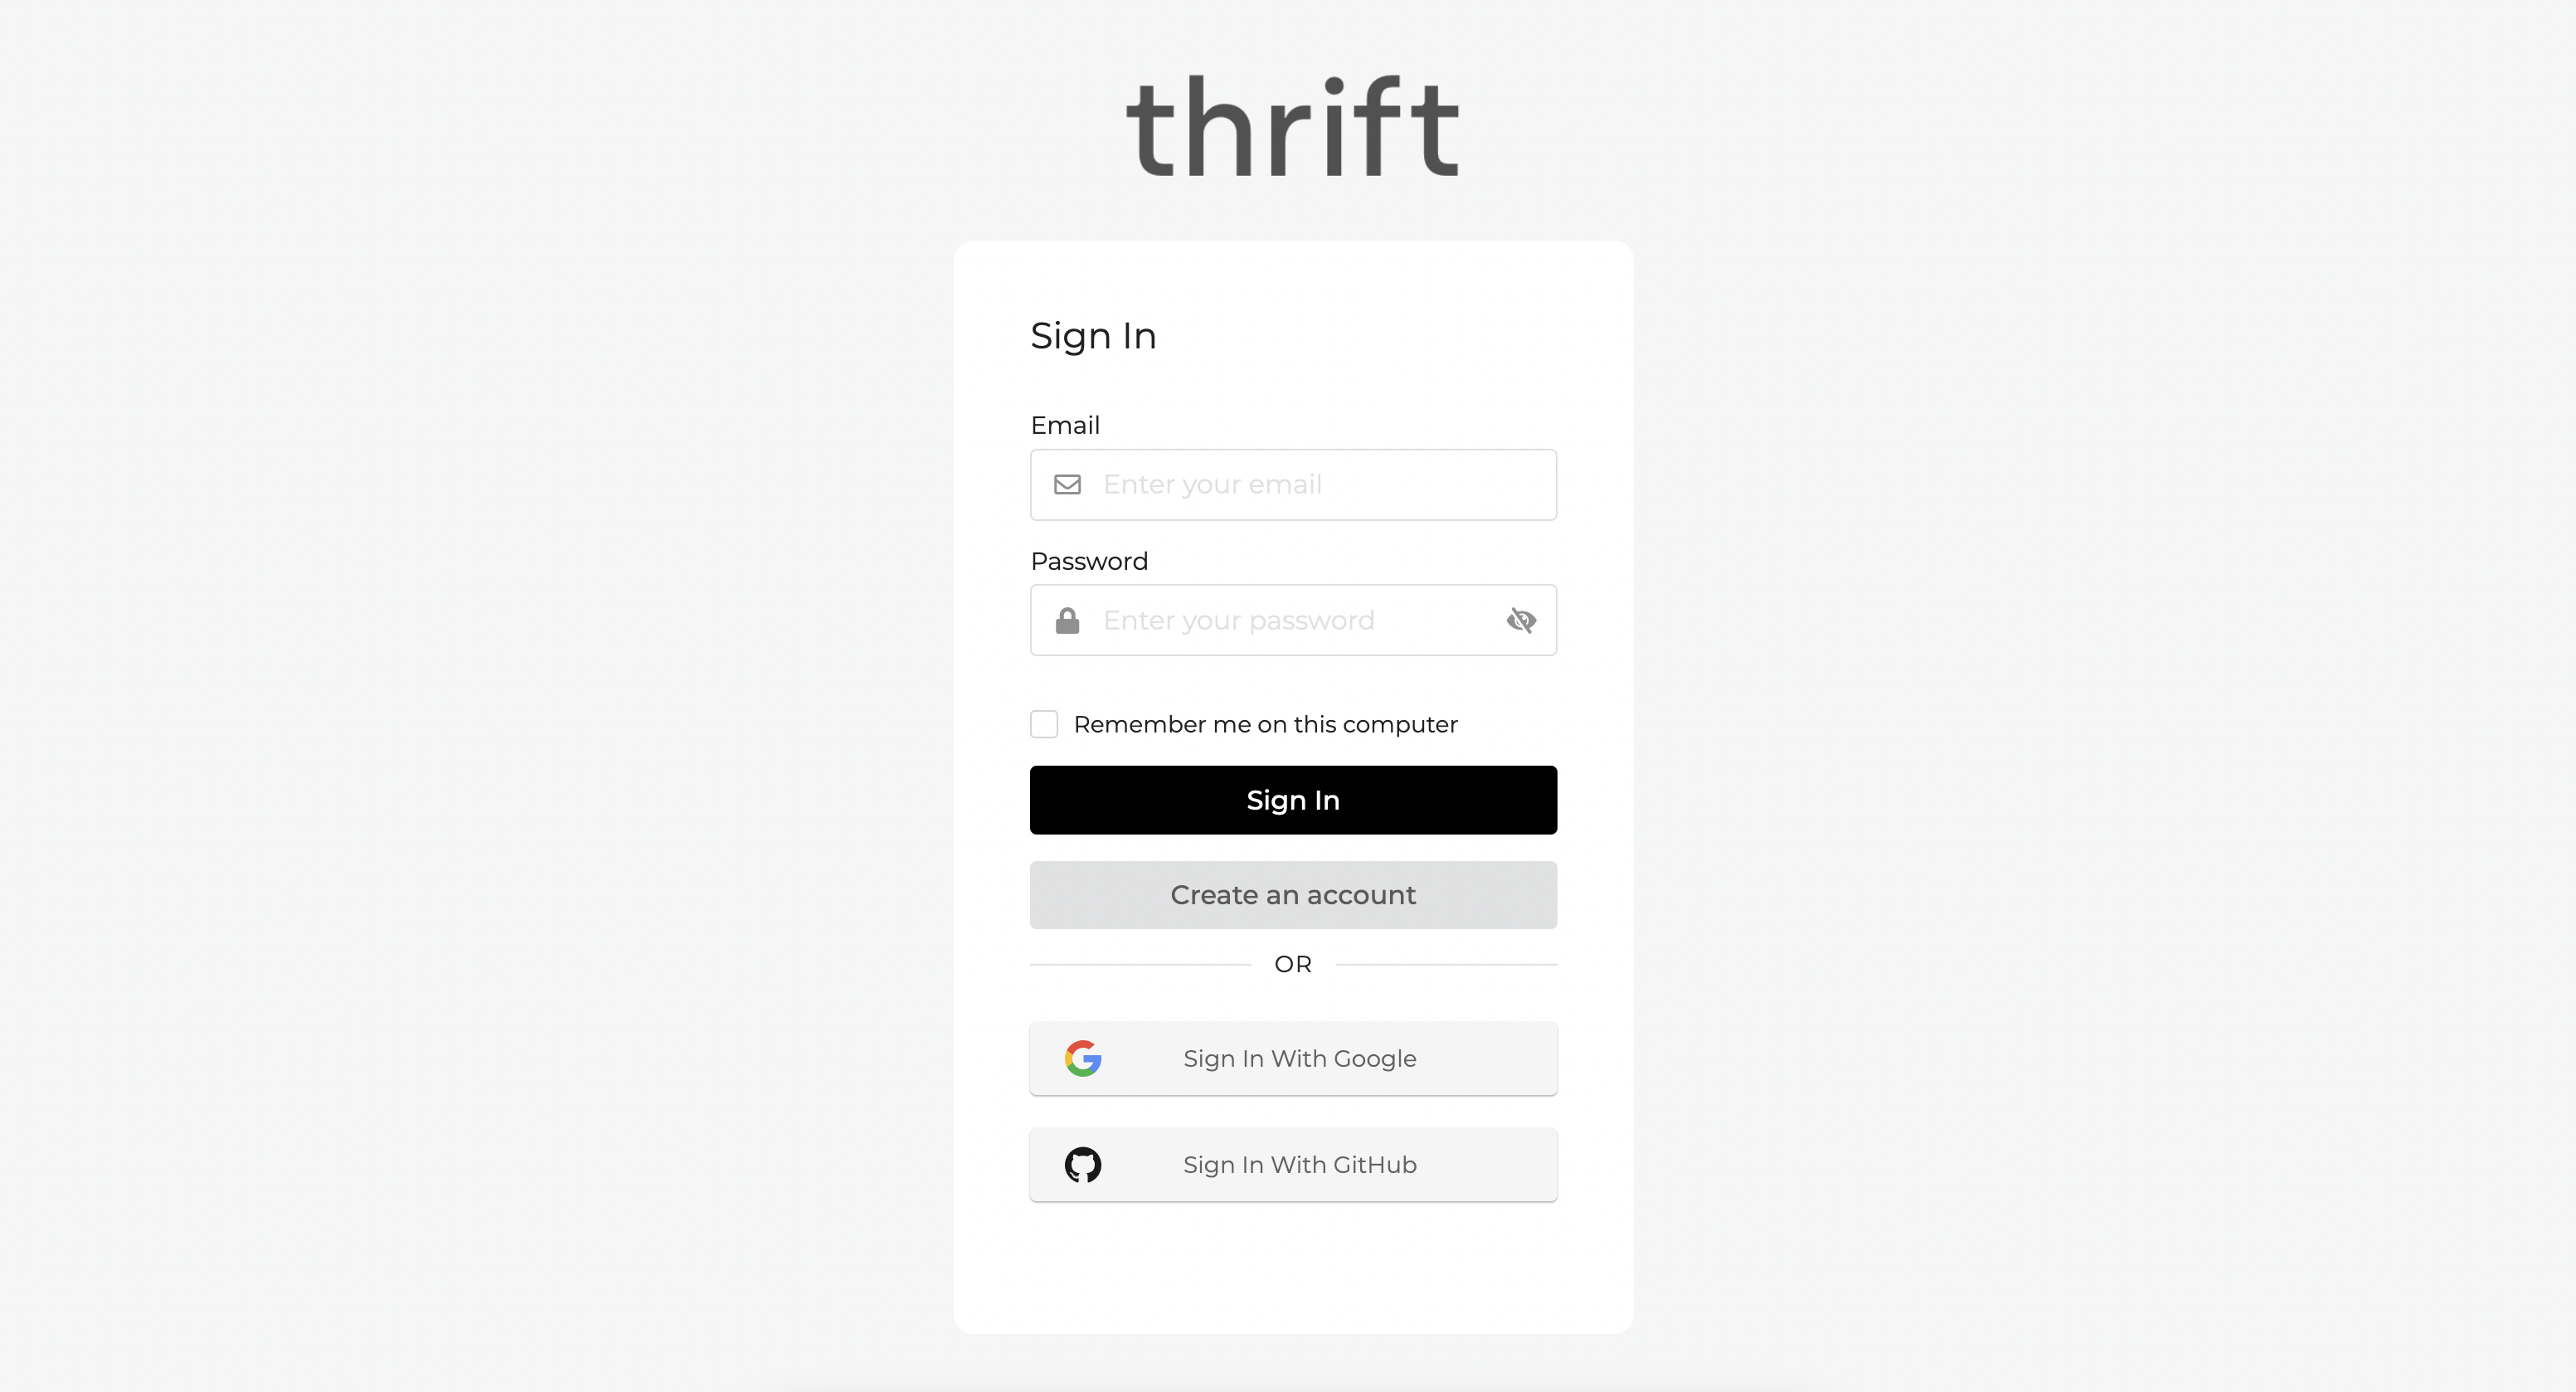 Thrift custom branded login page using the Asgardeo's new branding feature.